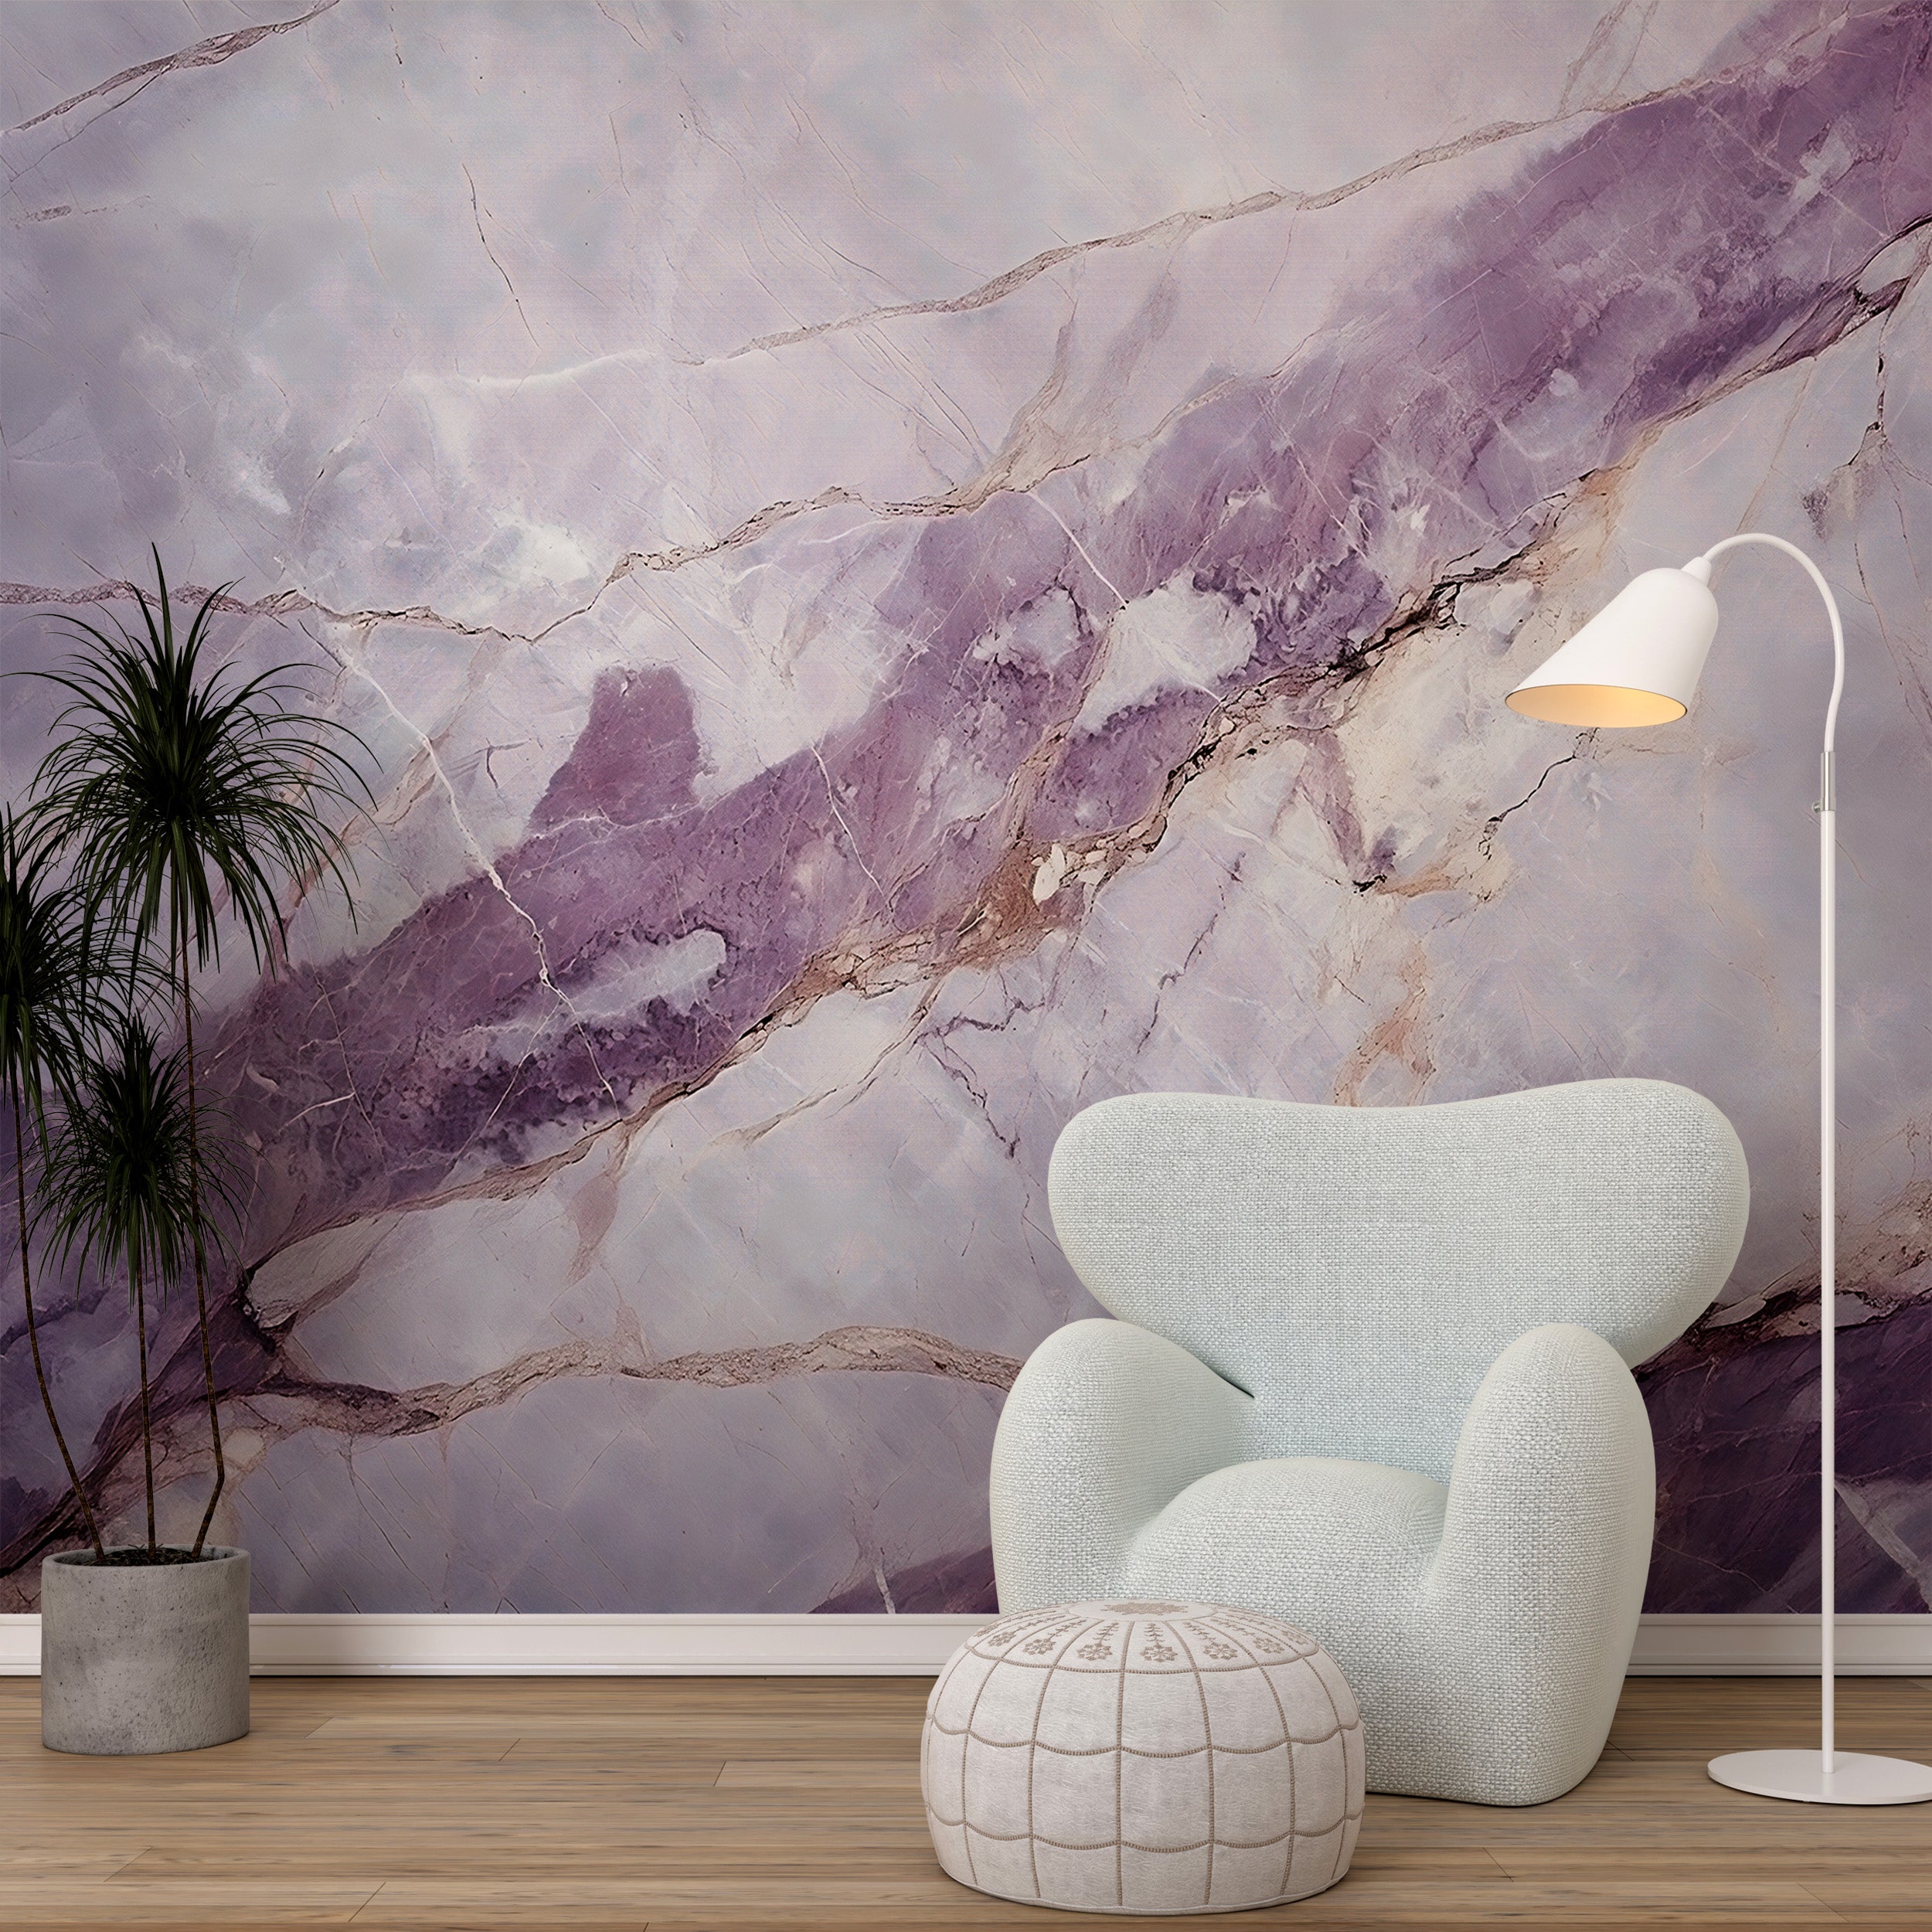 Elegant Pink and Grey Marble Peel and Stick Mural Adorning Living Room Wall